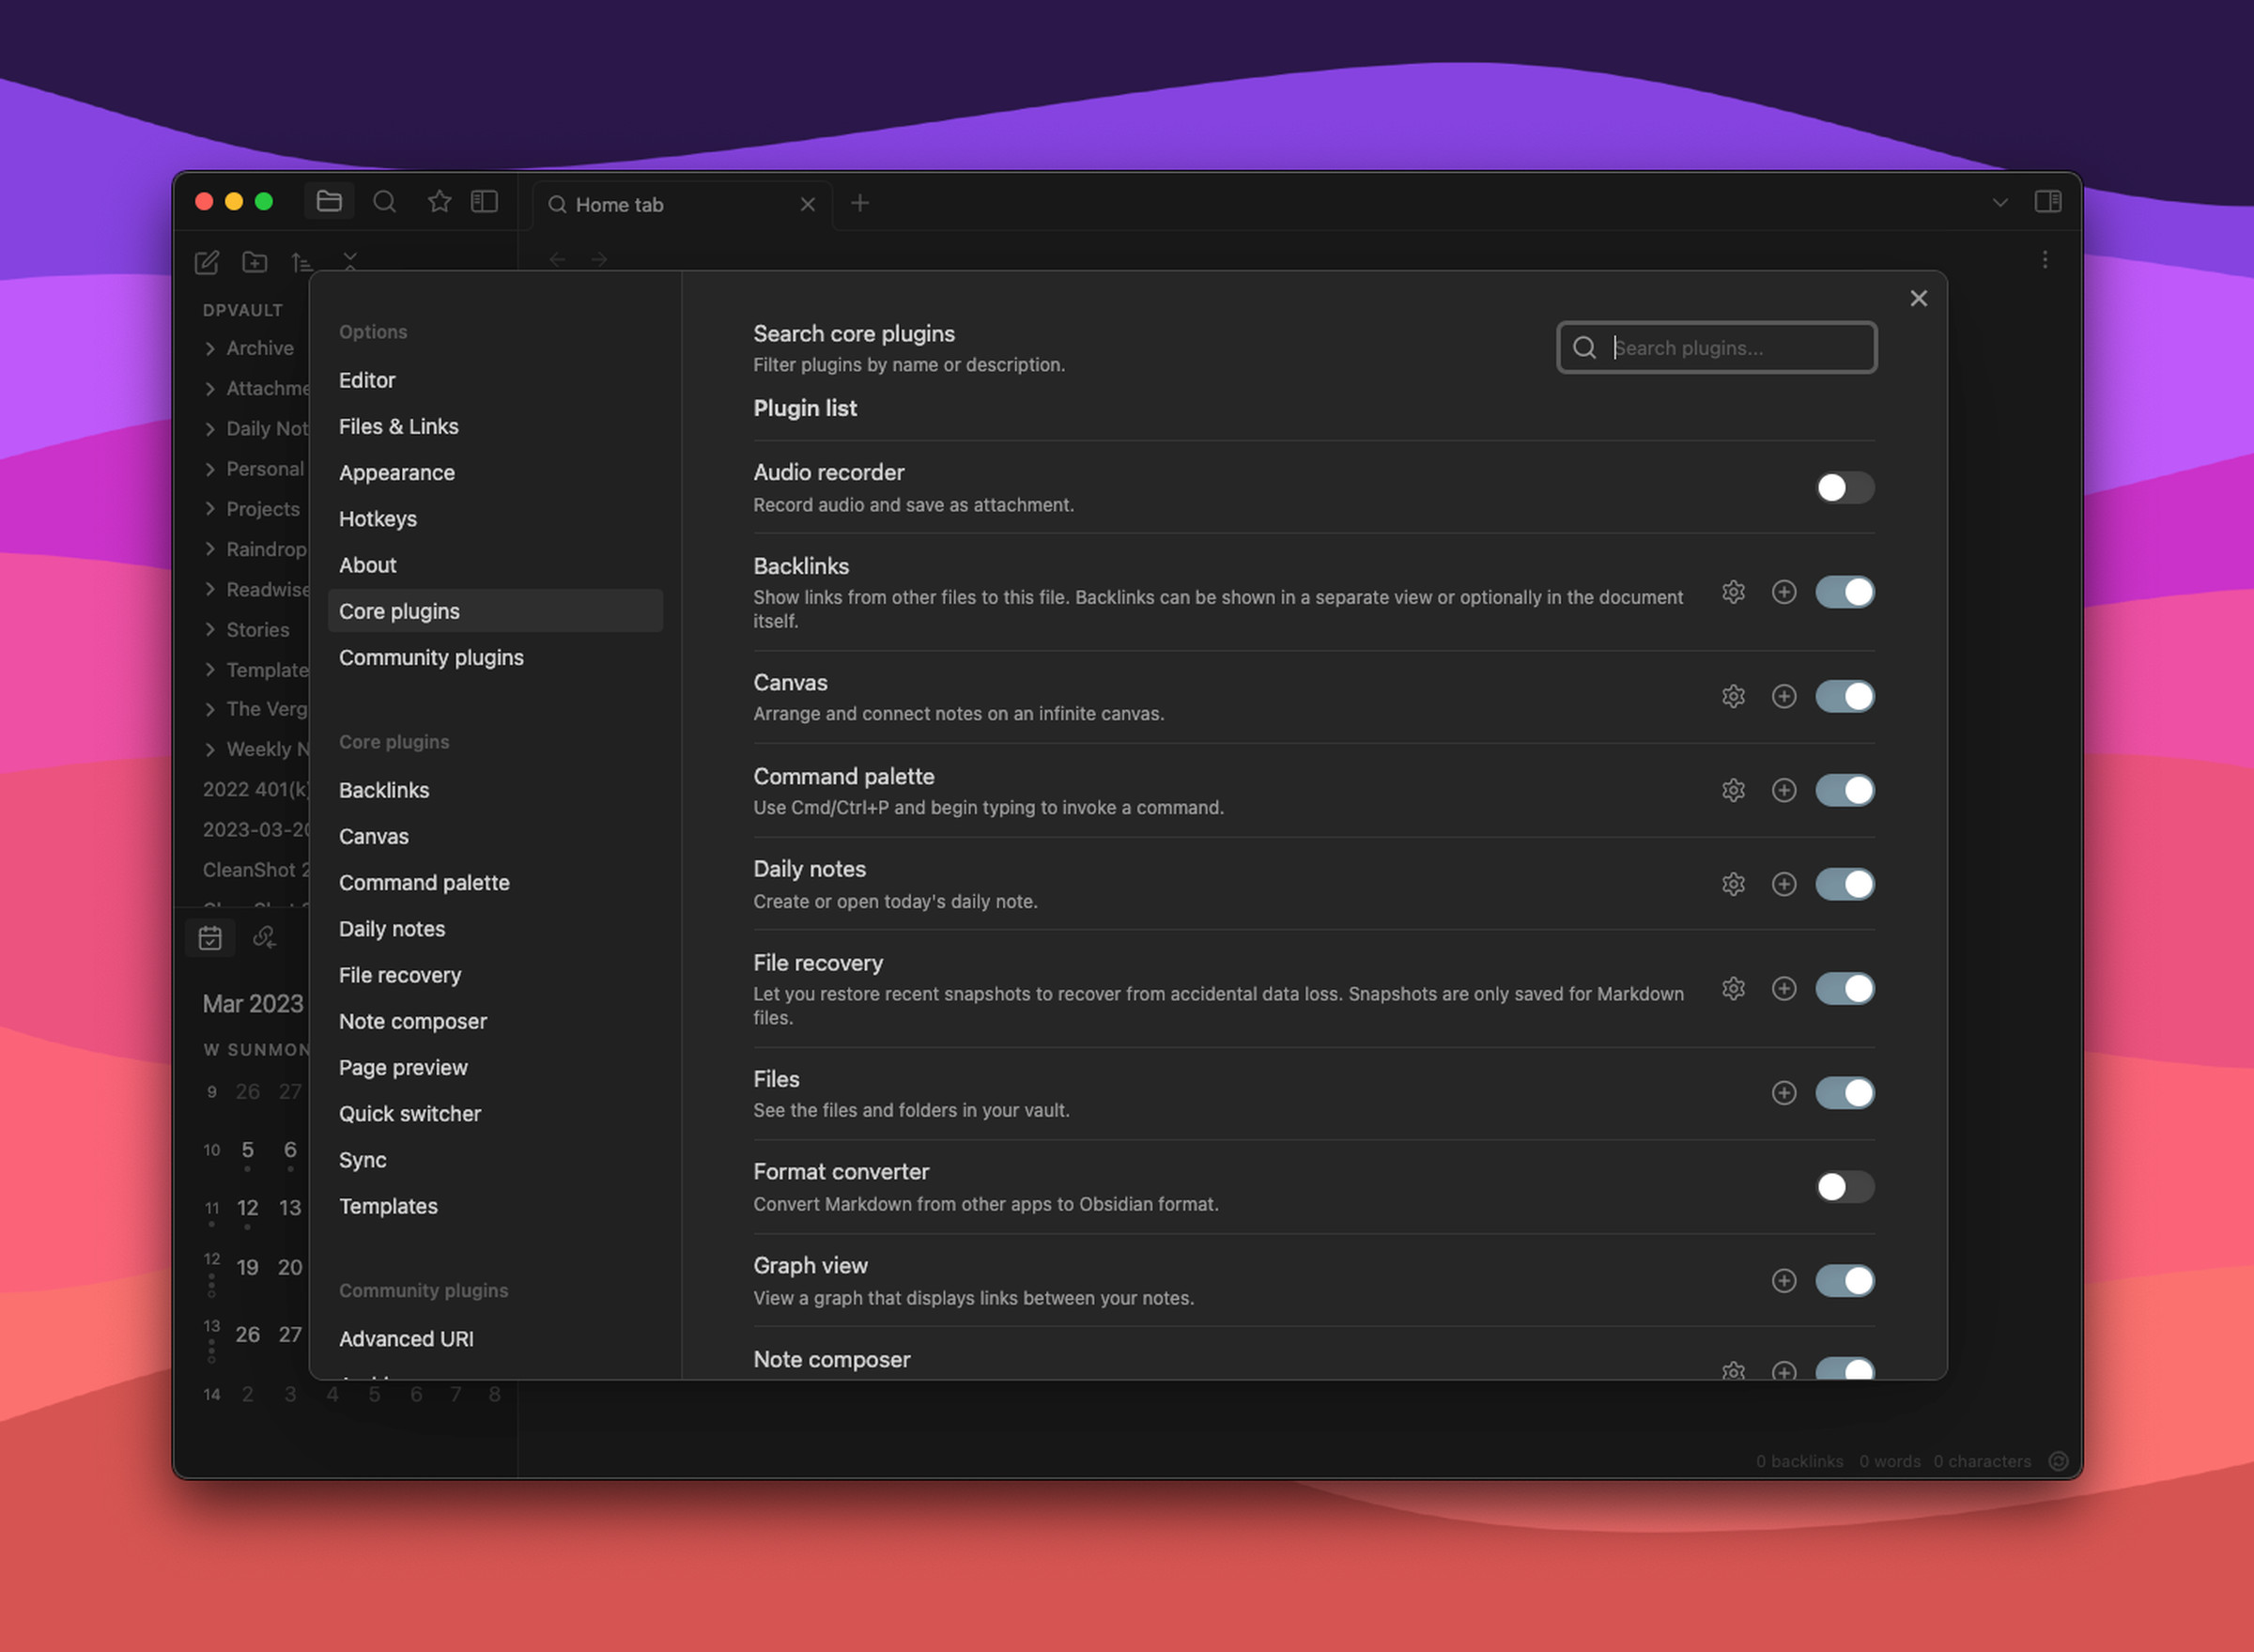 A screenshot of the Obsidian app’s settings, showing the Core plugins.